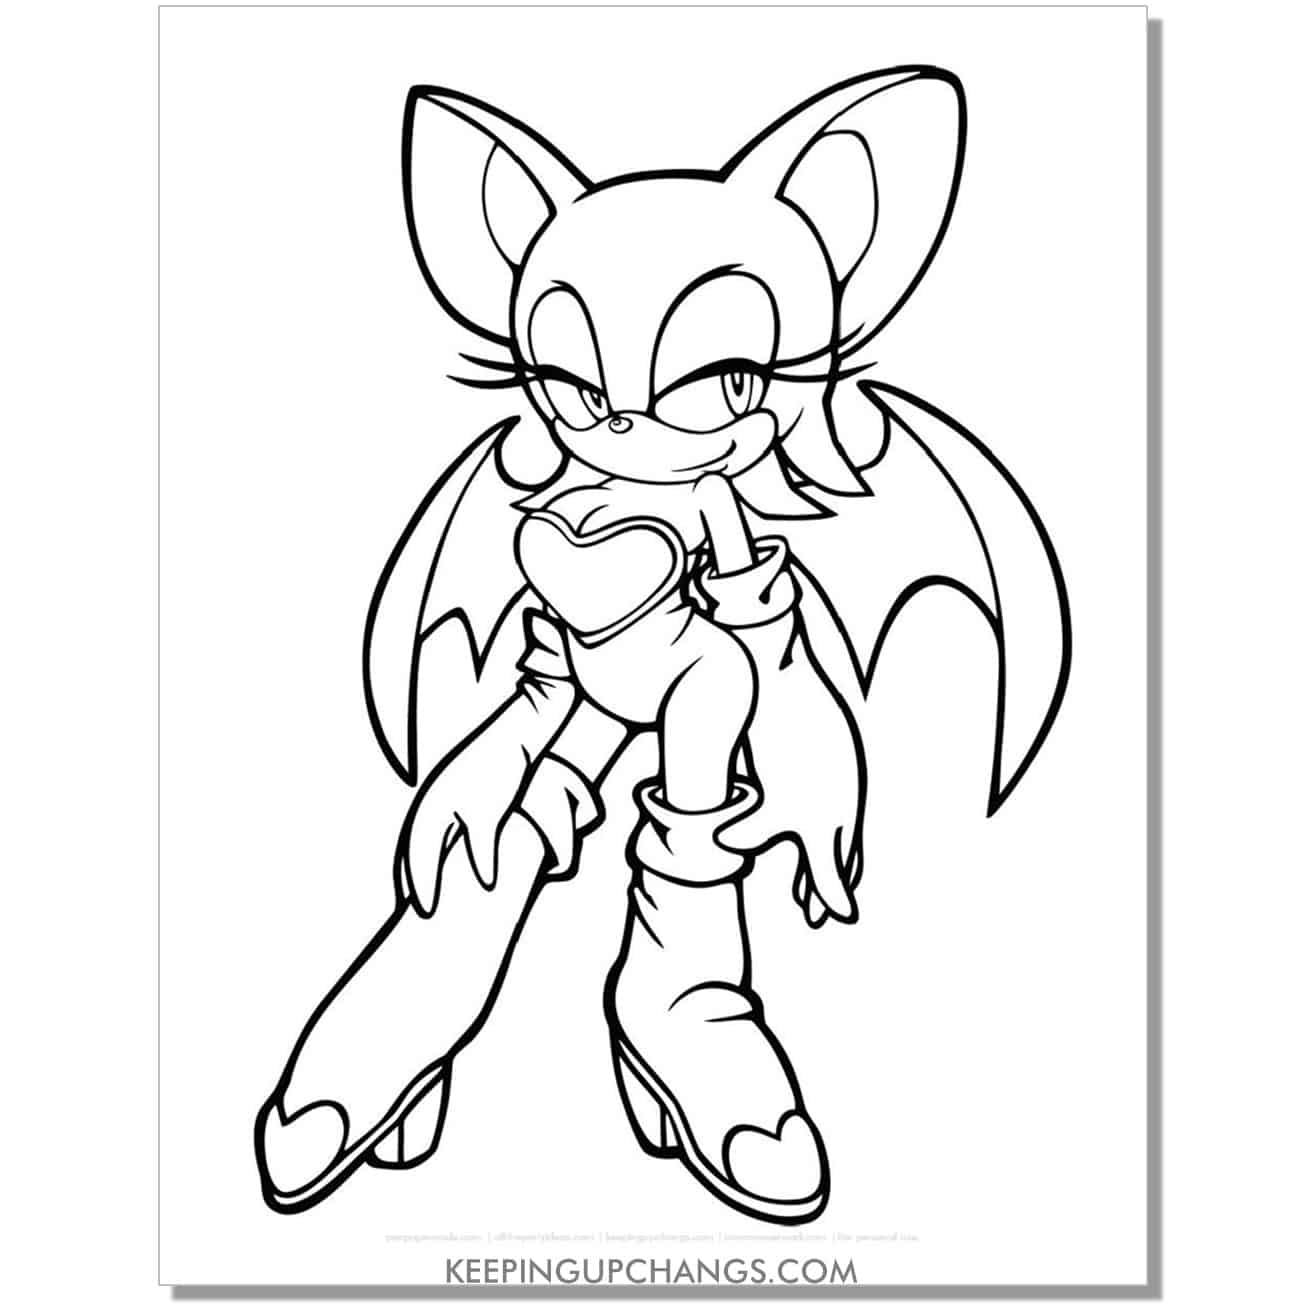 rouge smiling sonic coloring page.